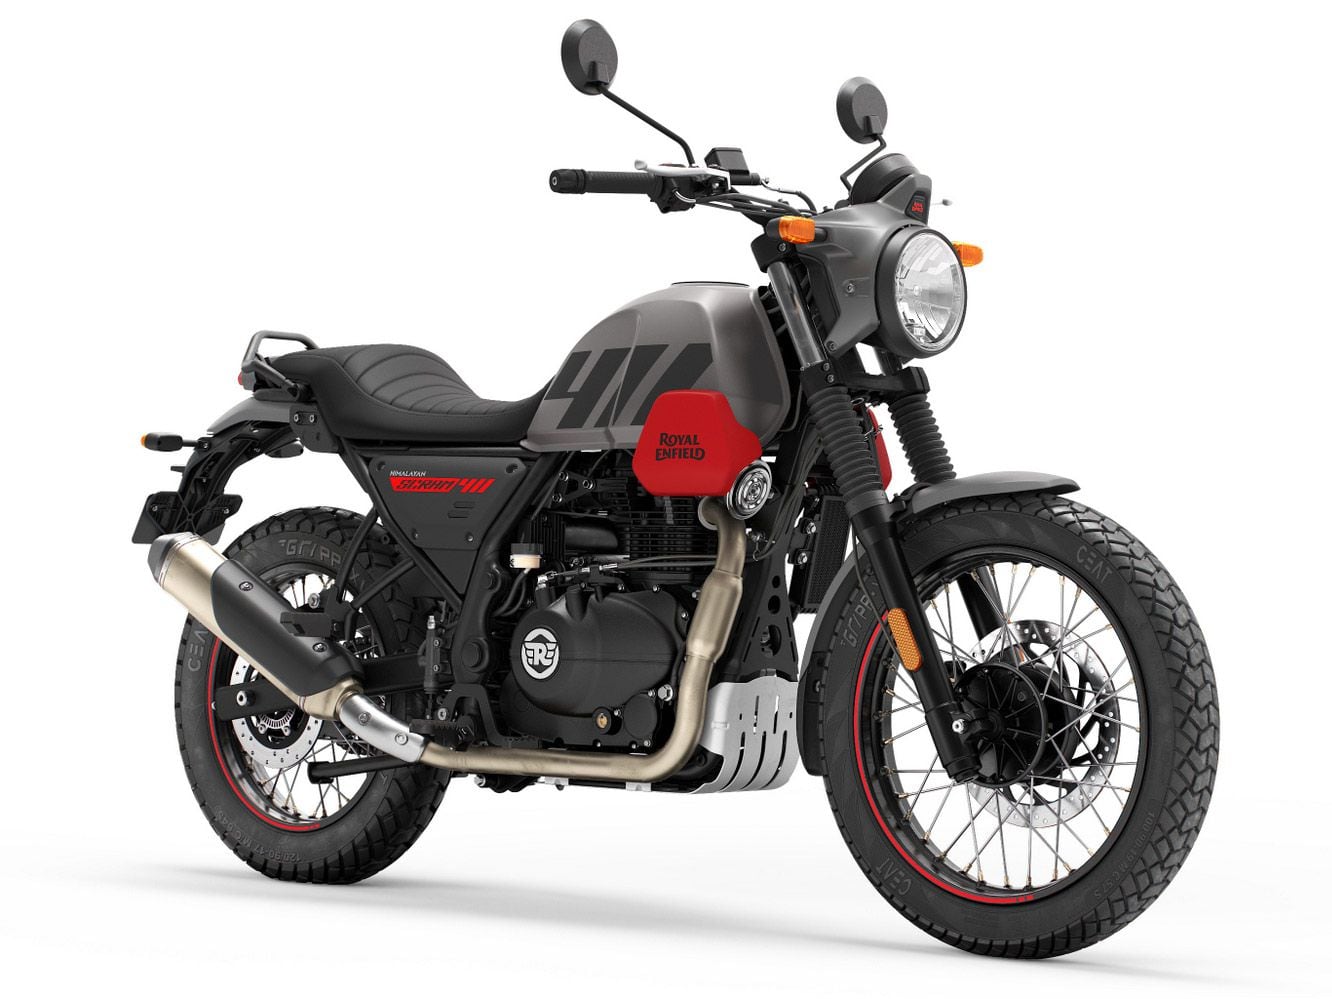 The chassis, engine, fuel tank, and suspension all carry over from the Himalayan, though the Scram gets a smaller 19-inch front wheel.